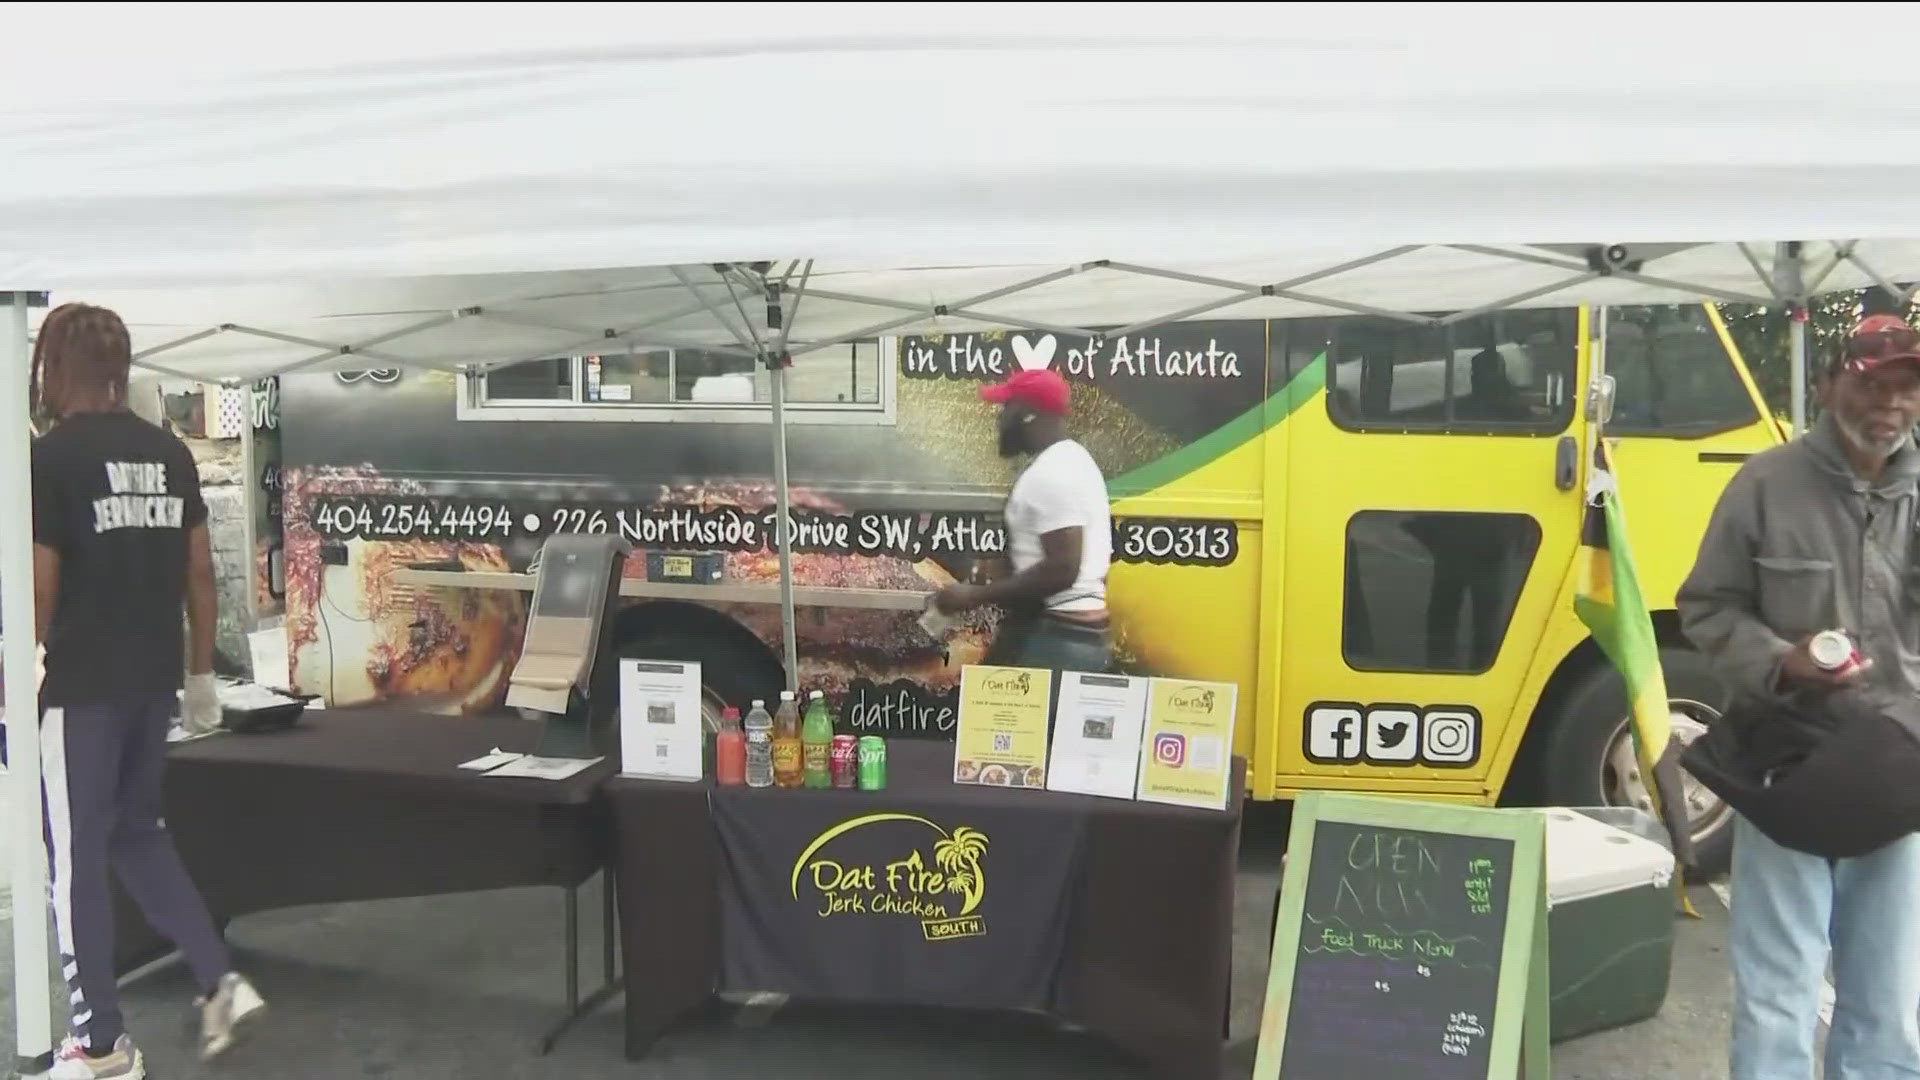 Chef Jay John and the rest of his crew at Dat Fire Jerk Chicken are working to get back on their feet serving a limited menu out of a food truck.